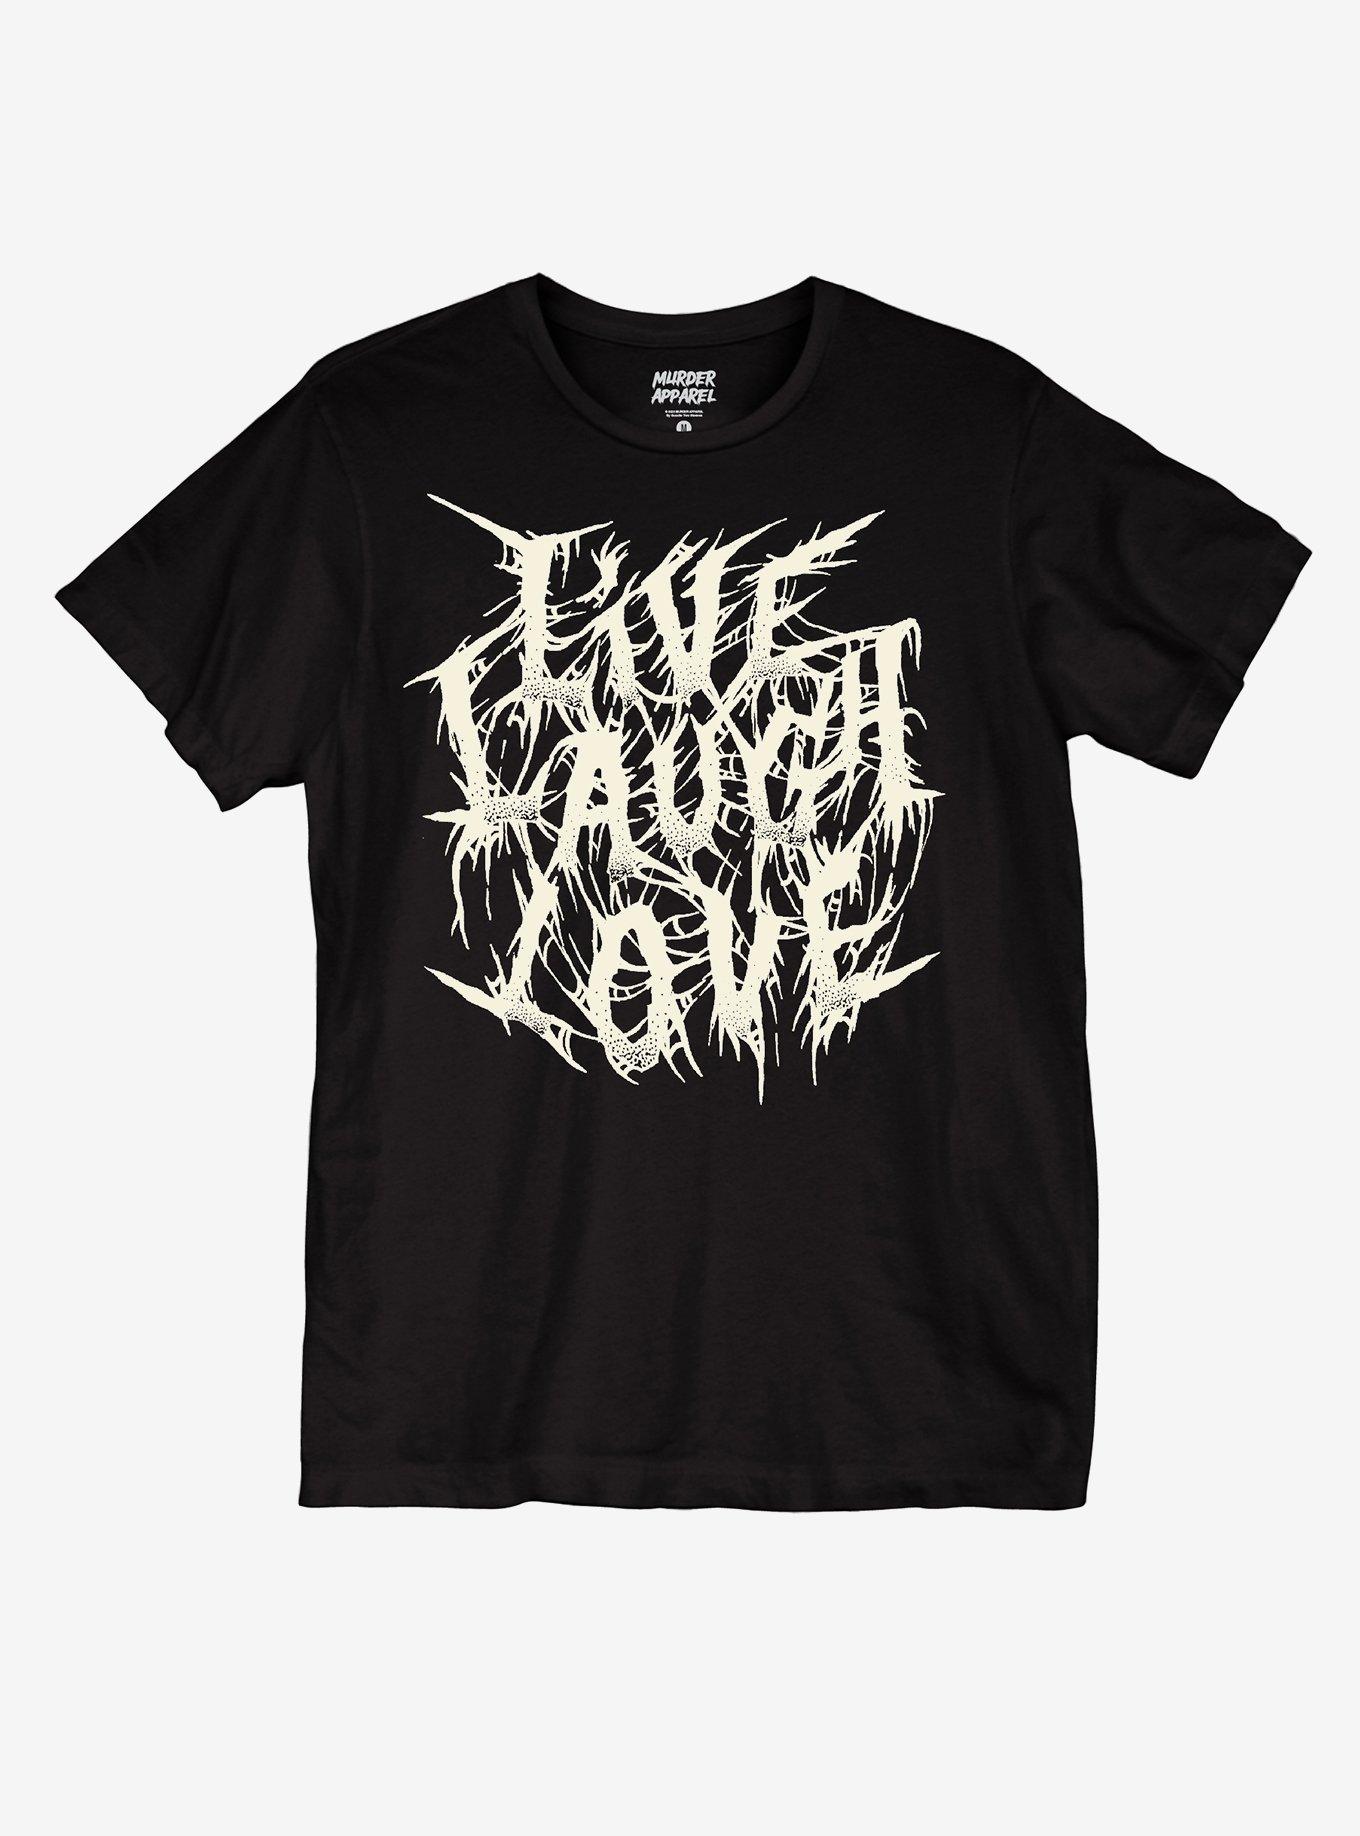 Twisted Live Laugh Love T-Shirt By Murder Apparel, BLACK, hi-res